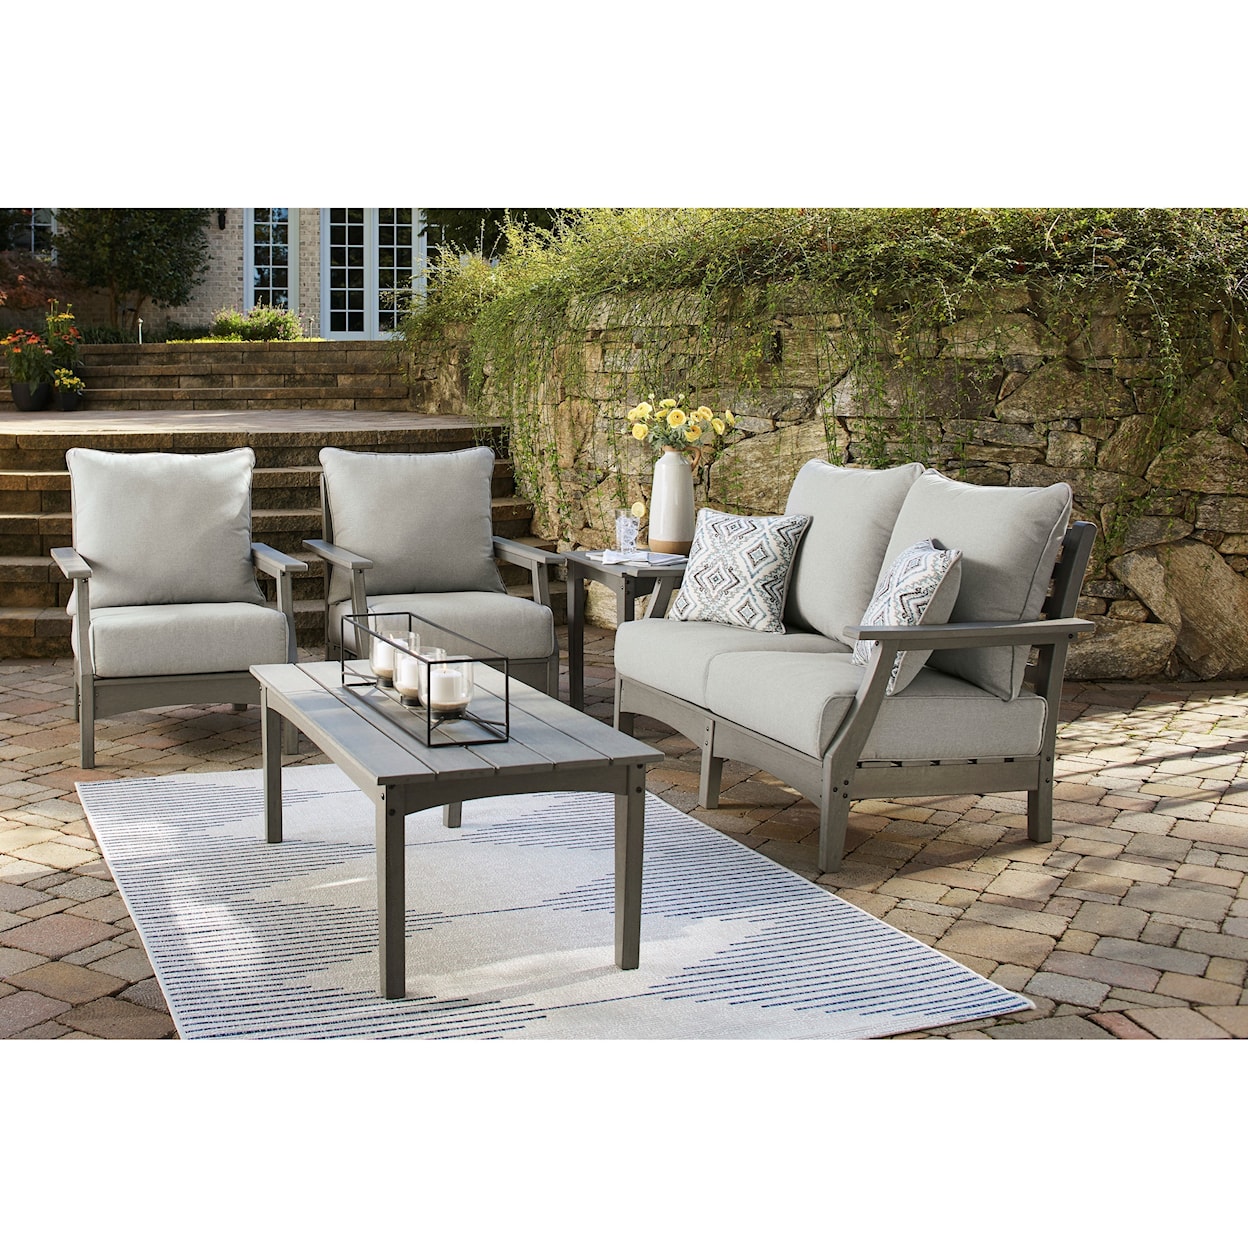 Signature Design by Ashley Visola Outdoor Loveseat, 2 Chairs, and Table Set